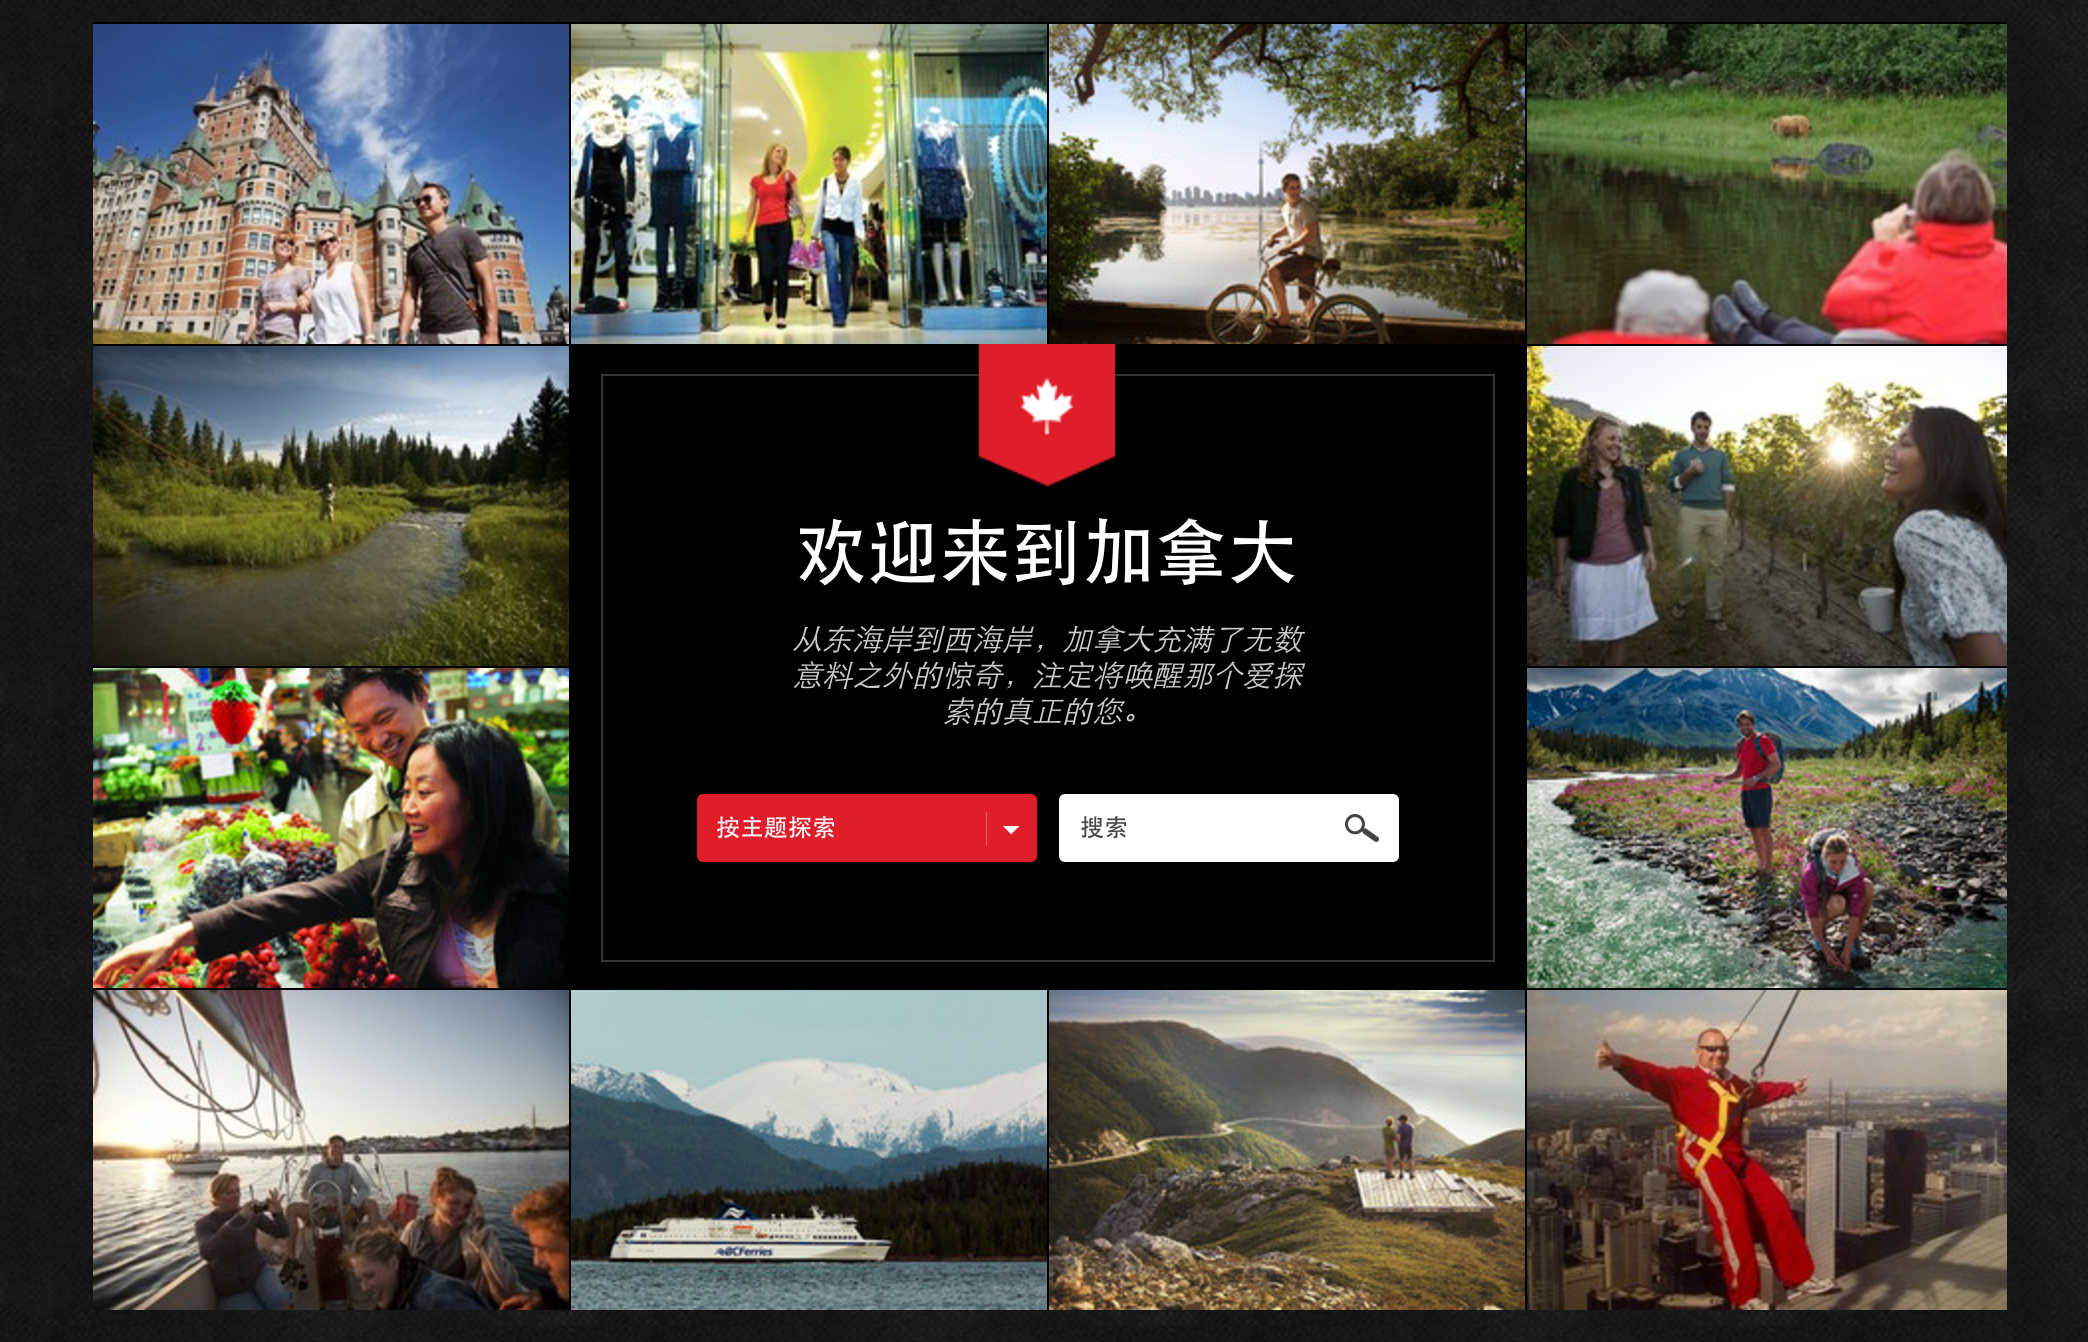 Chinese Luxury Travelers Seek out 'Truly Unique' Experiences That Will Impress Friends on WeChat